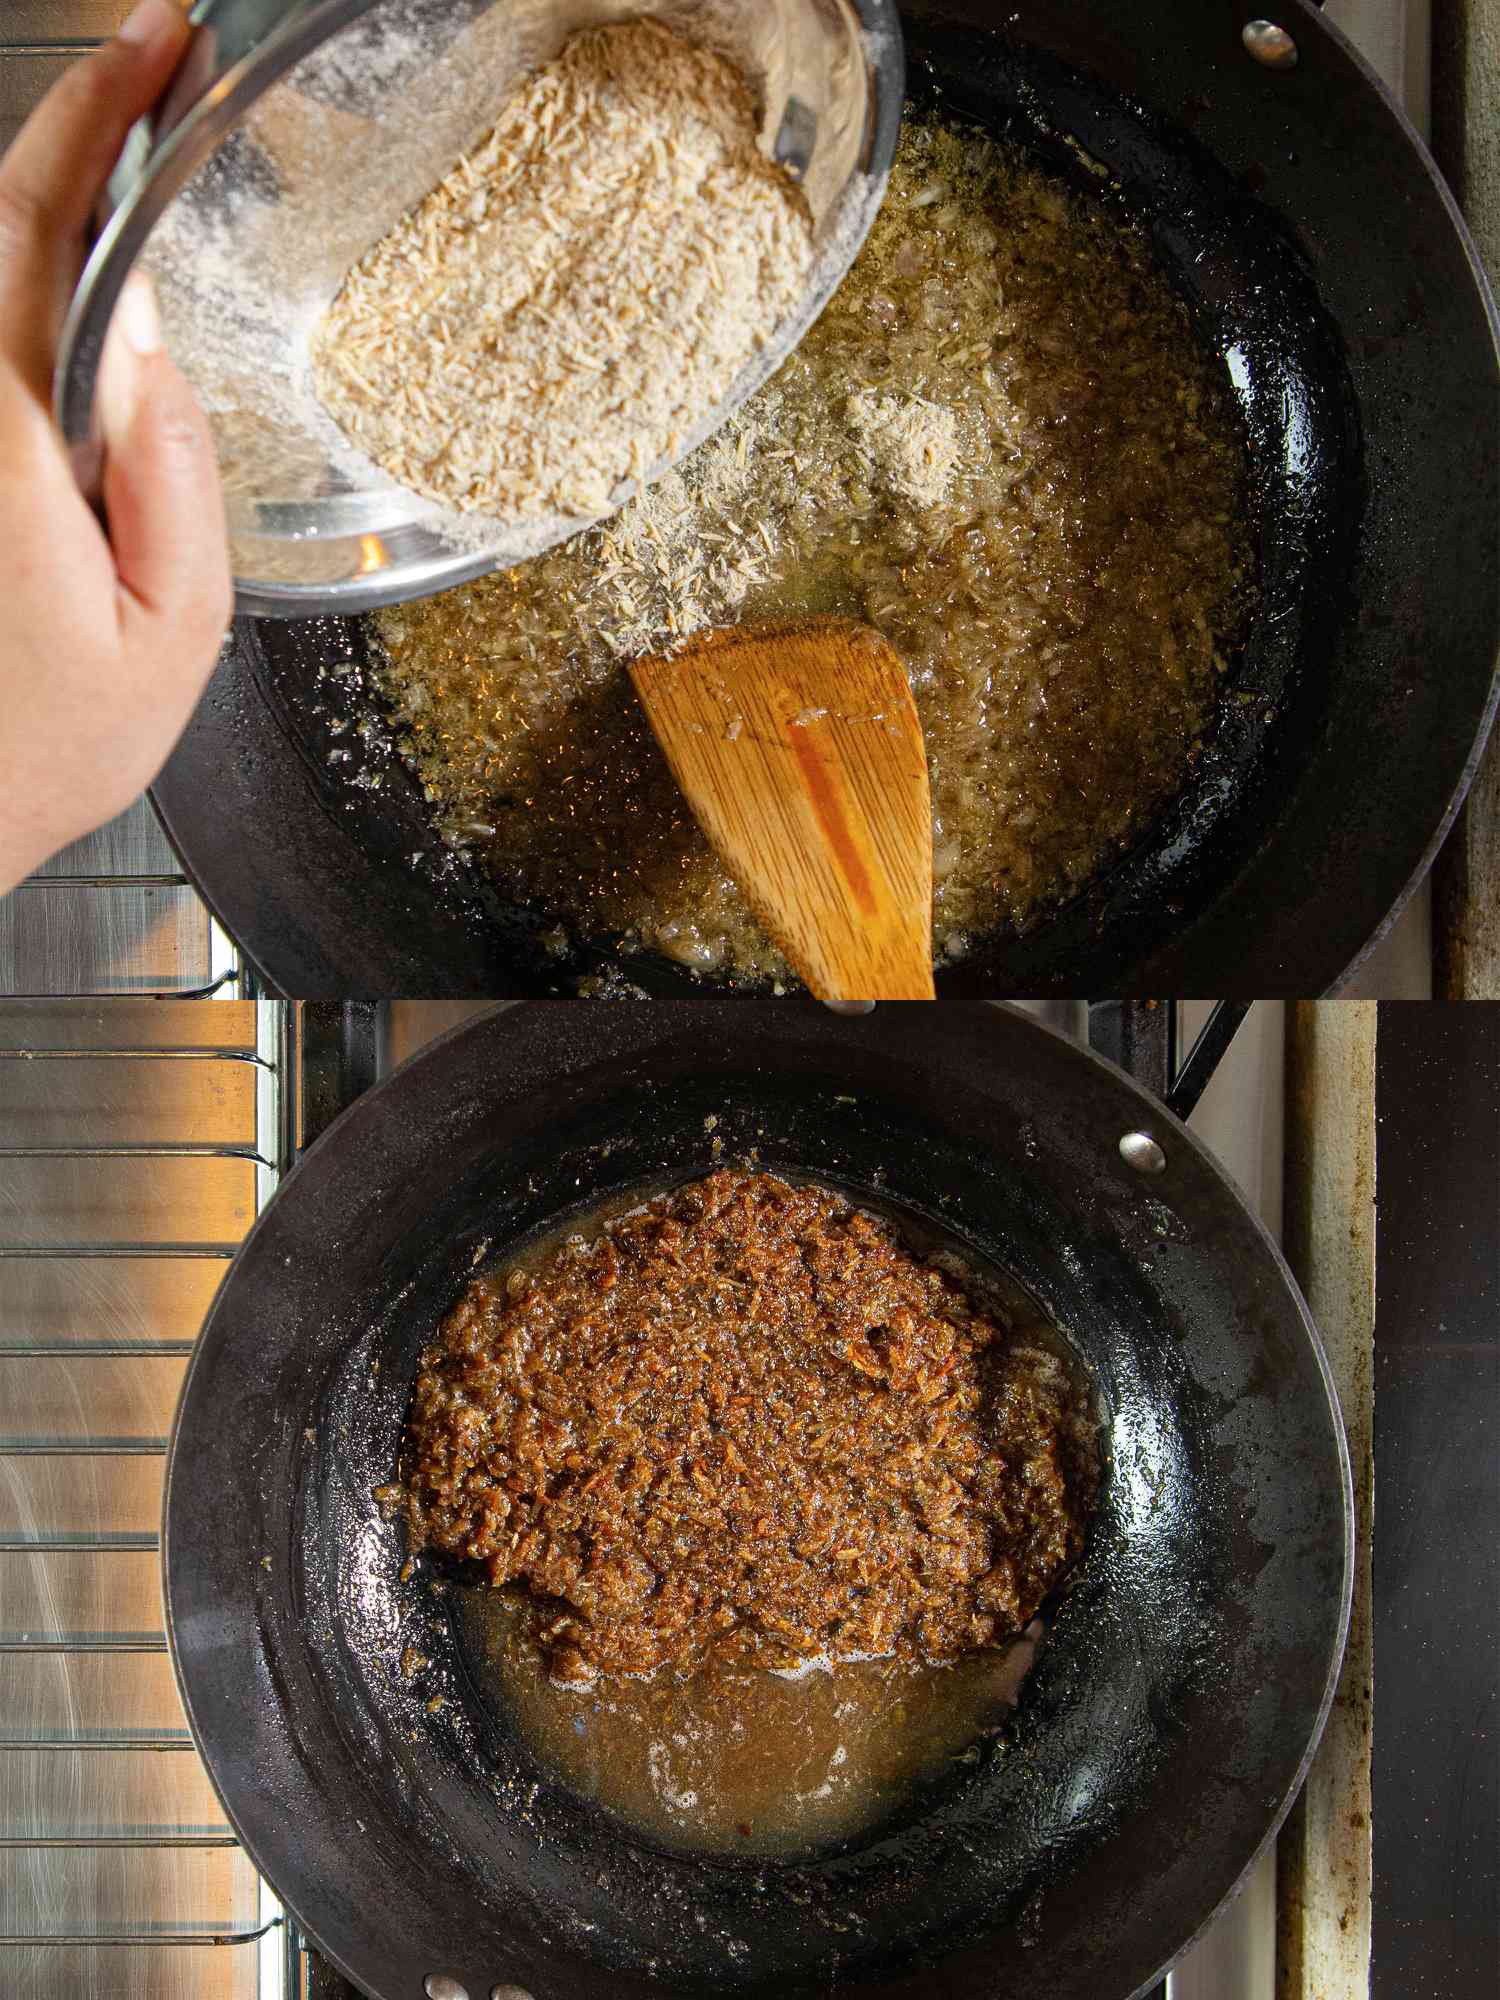 Two image collage of adding ikon billis to wok and then oil separating.